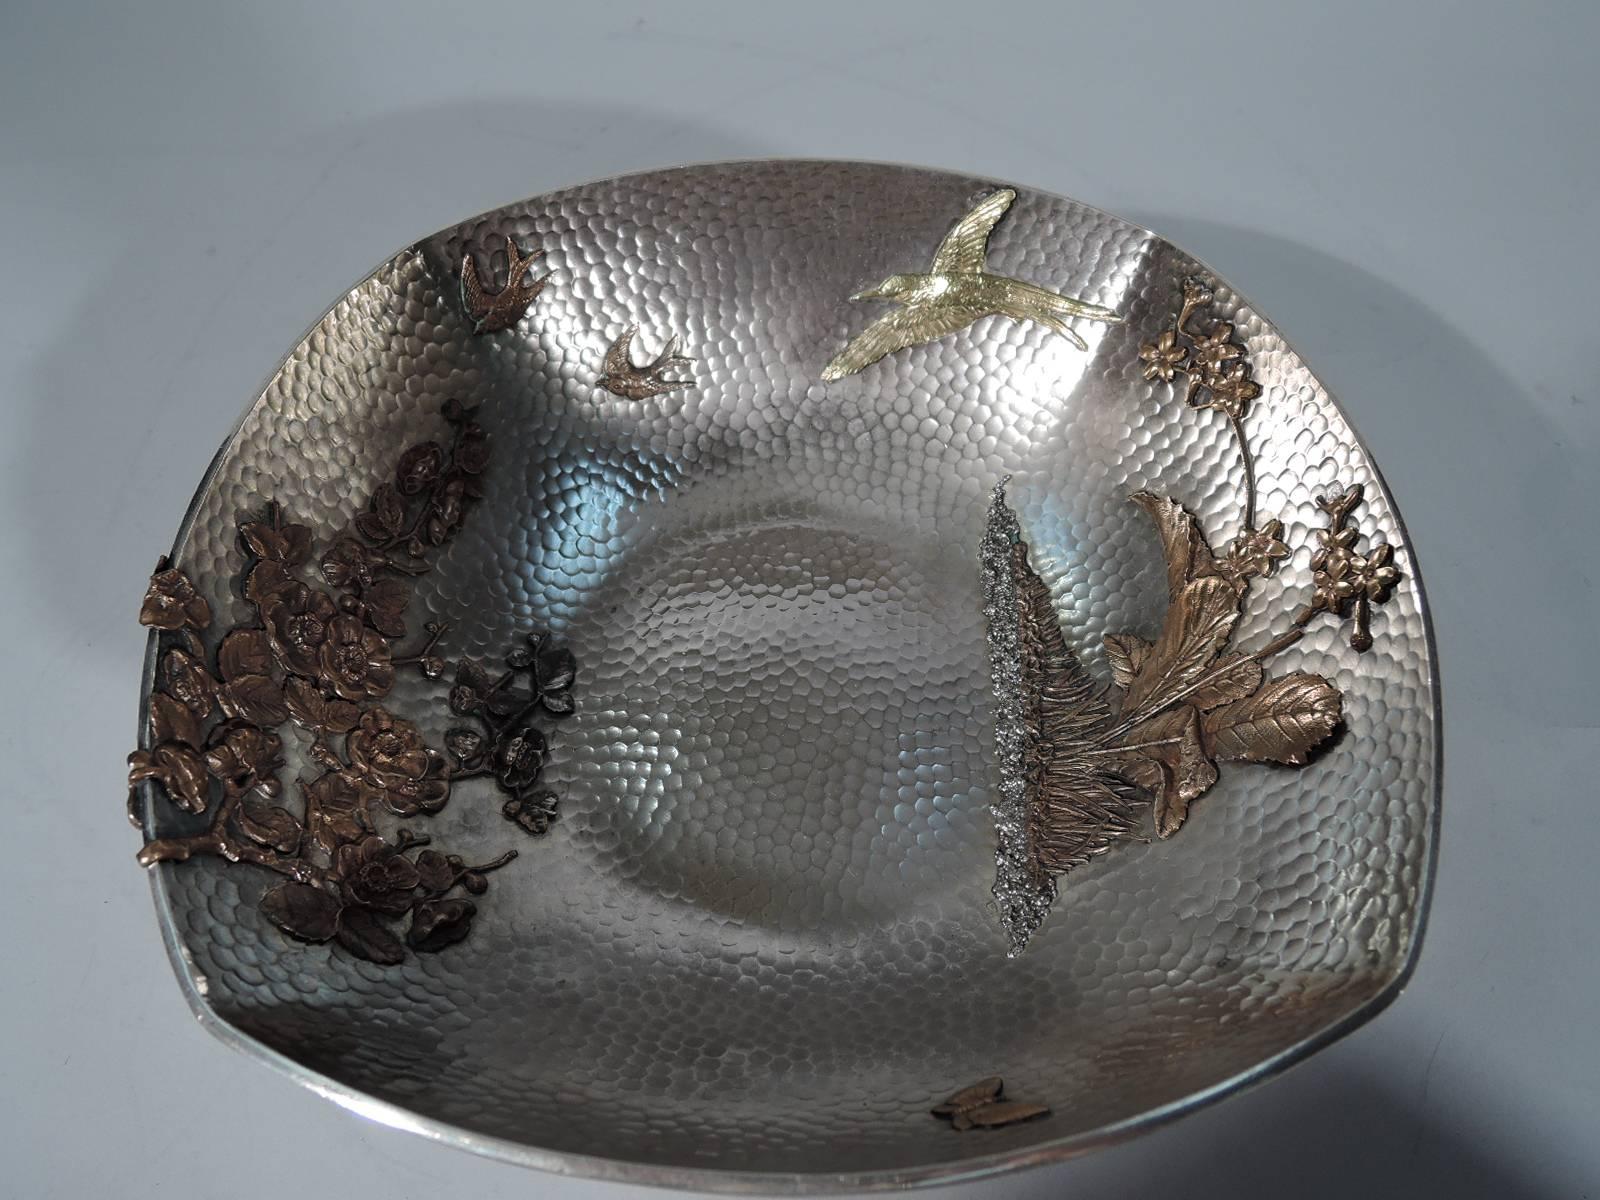 Rare and beautiful hand-hammered sterling silver bowl with mixed metal. Made by Gorham in Providence in 1880. Four curved sides with honeycomb hand hammering. Interior has applied mixed metal ornament: butterfly, birds, flower planted in granulated